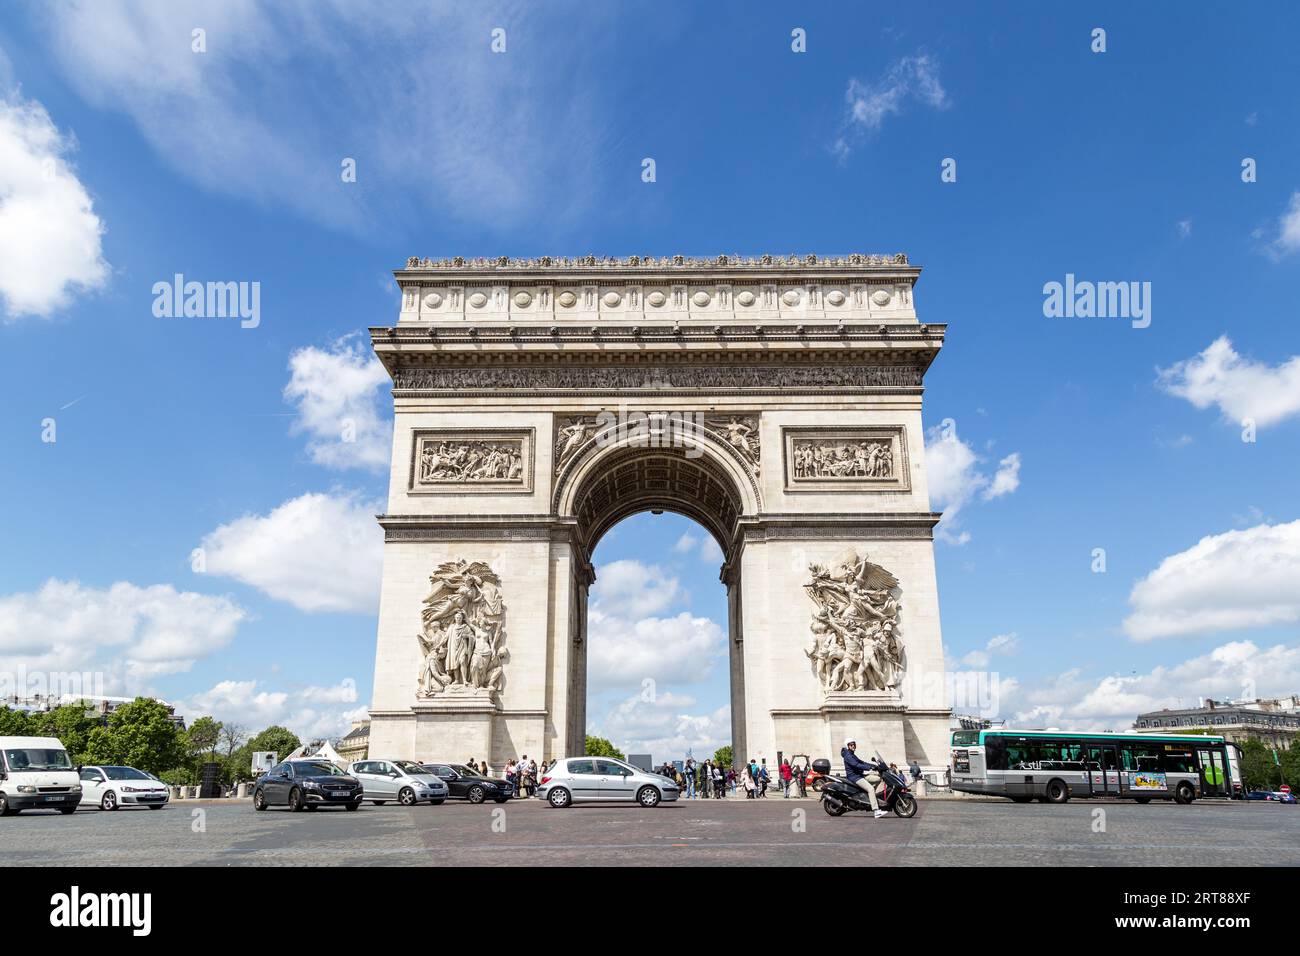 Paris/France - September 10, 2019 : Asian tourist girl with a Louis Vuitton  shopping bag on Champs-Elysees avenue Stock Photo - Alamy